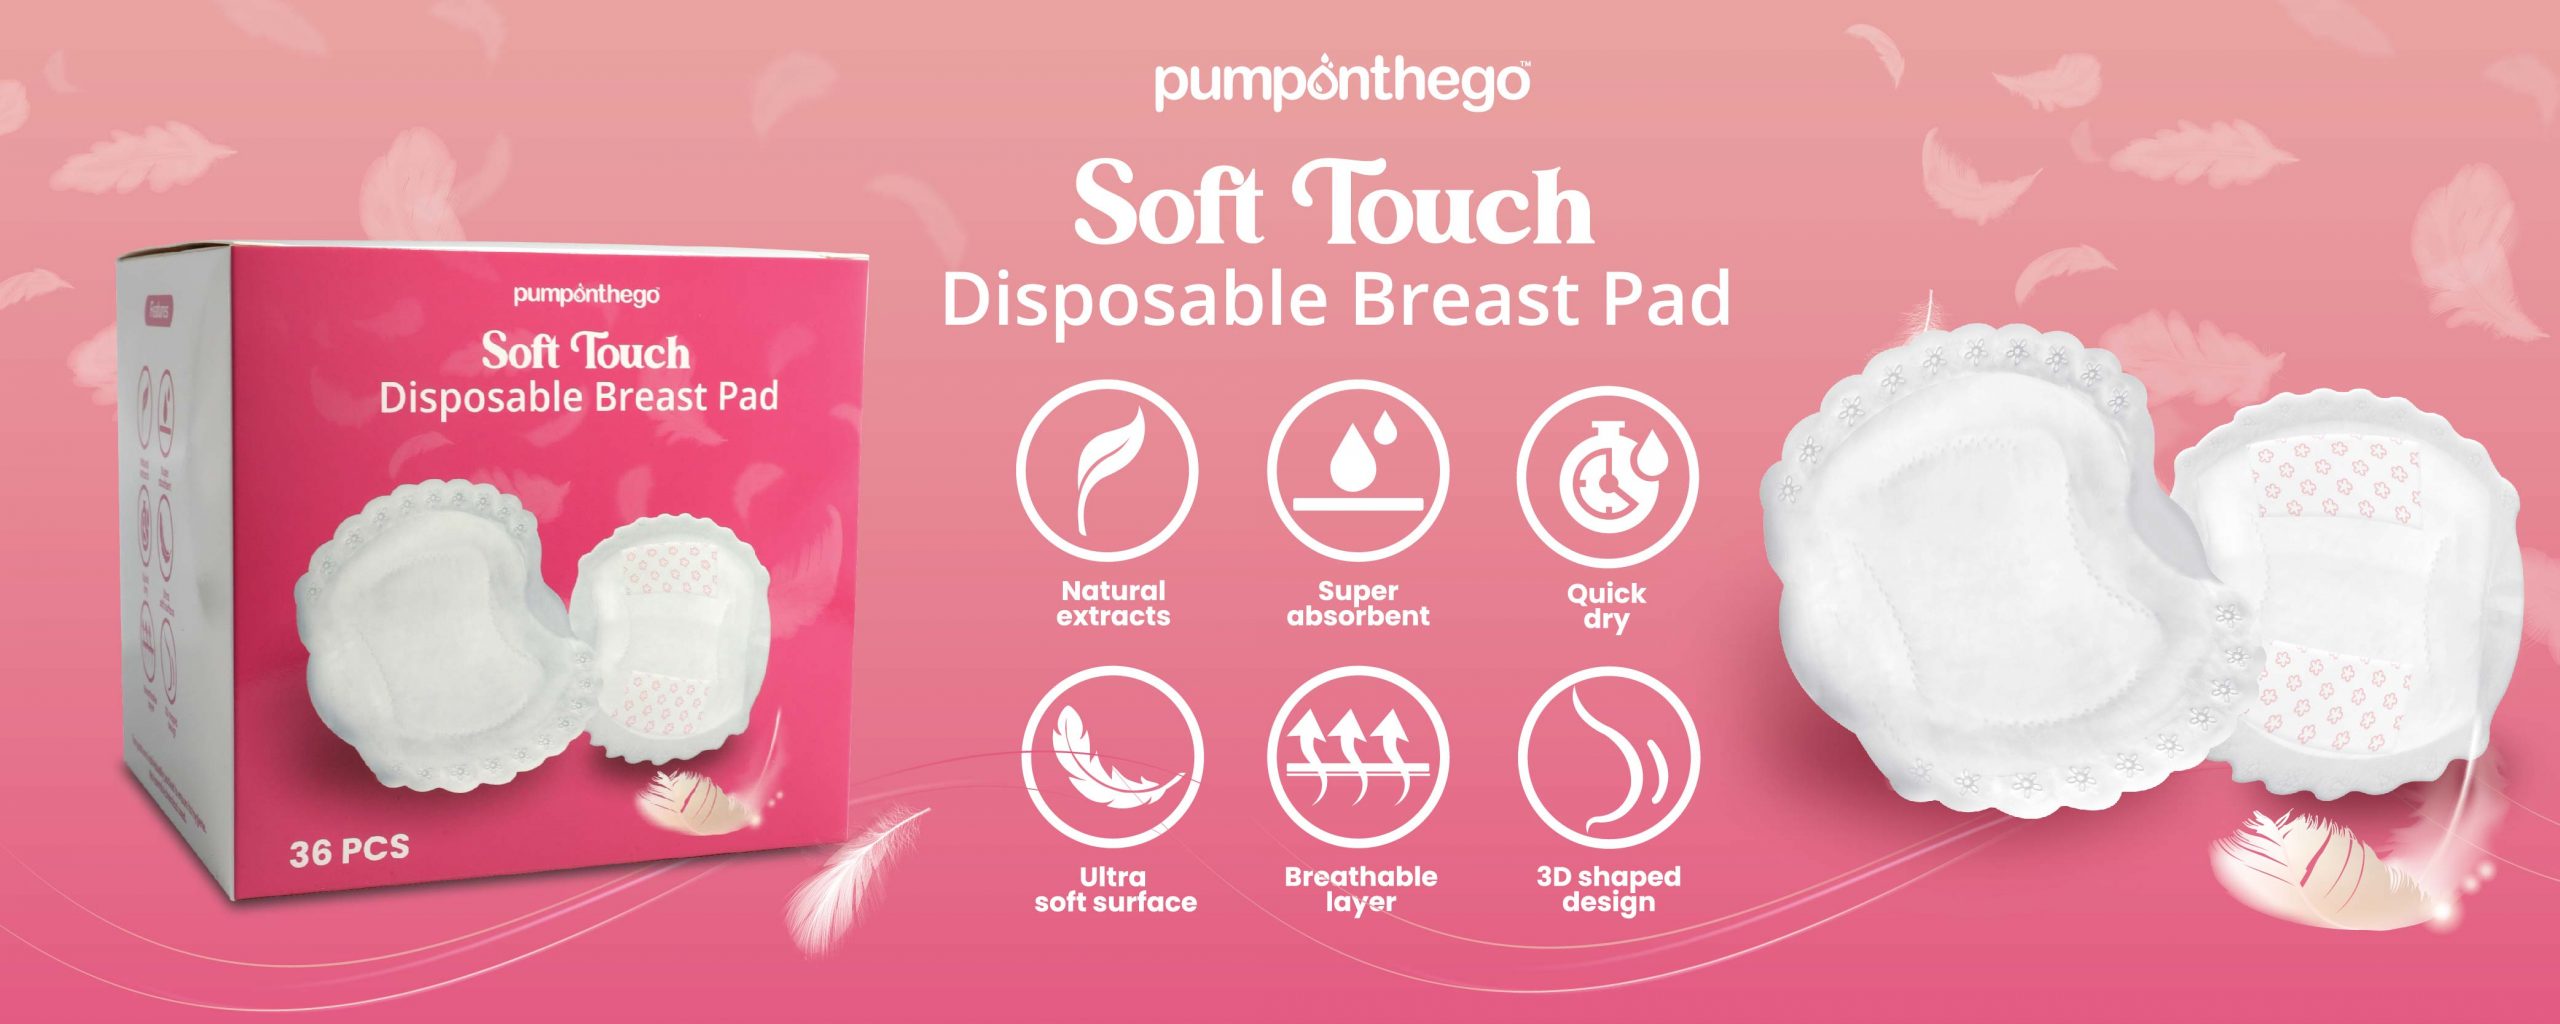 BREASTPAD SOFT TOUCH